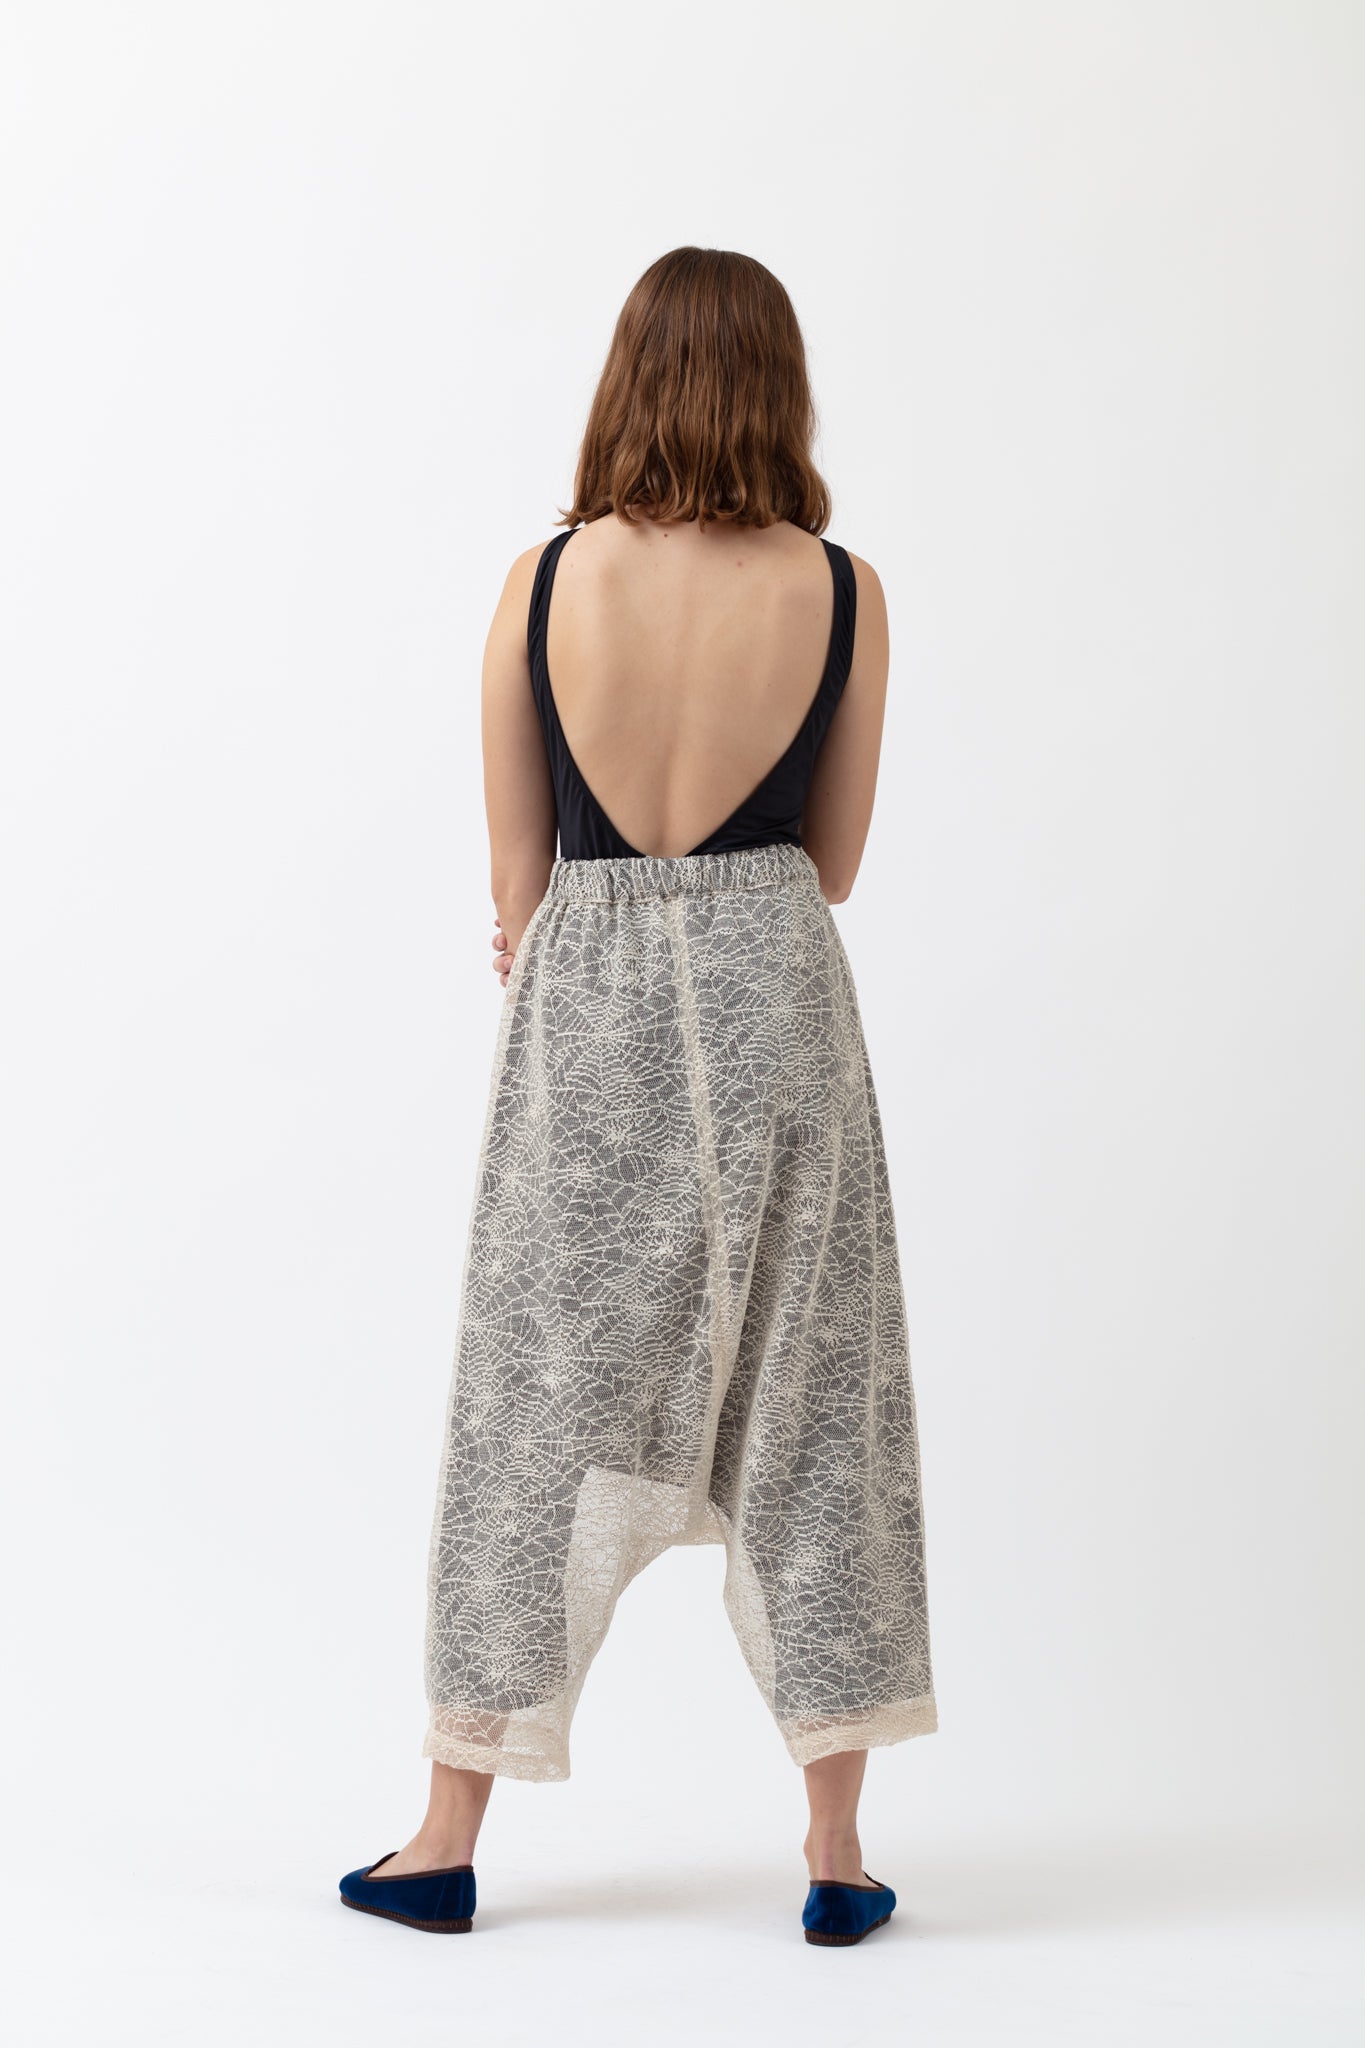 CULOTTE BOTTOMS IN SPIDER WEB LACE